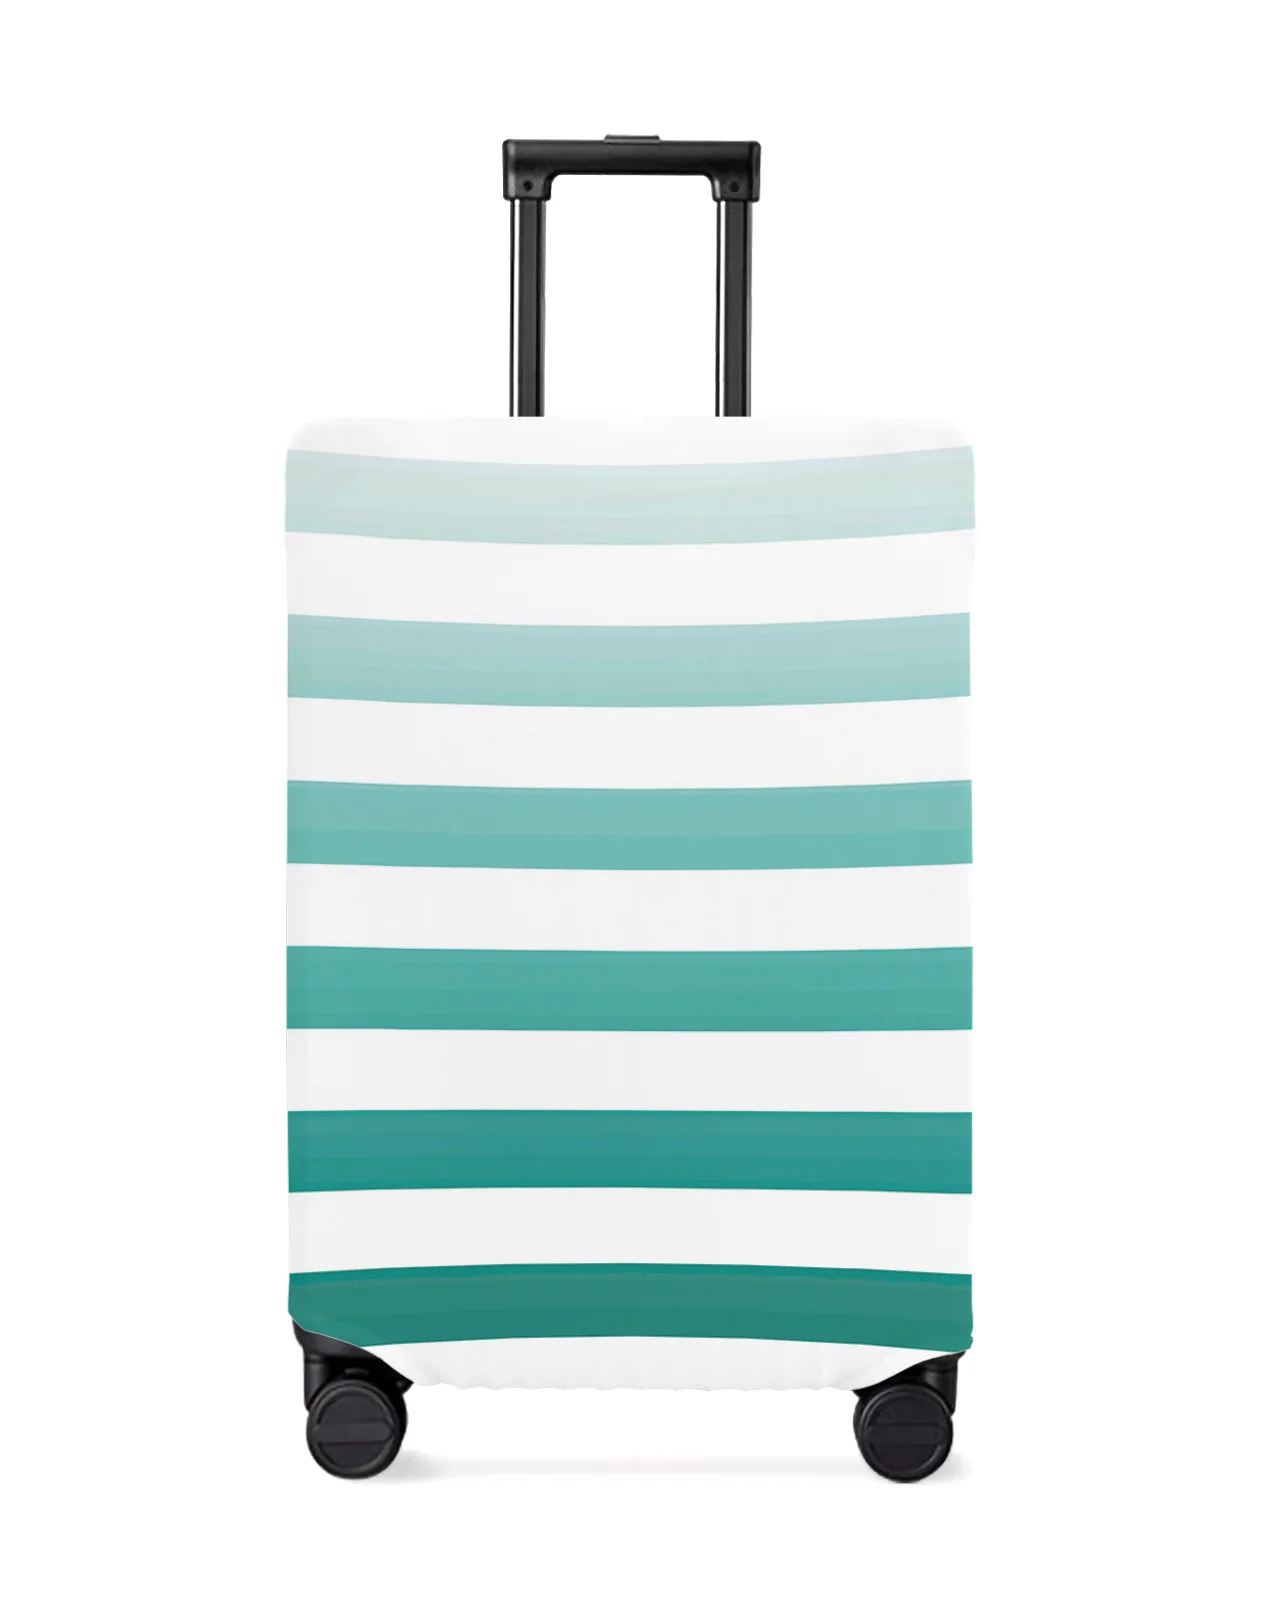 

Geometric Stripe Cyan Turquoise Gradient Travel Luggage Cover Elastic Baggage Cover Suitcase Case Dust Cover Travel Accessories